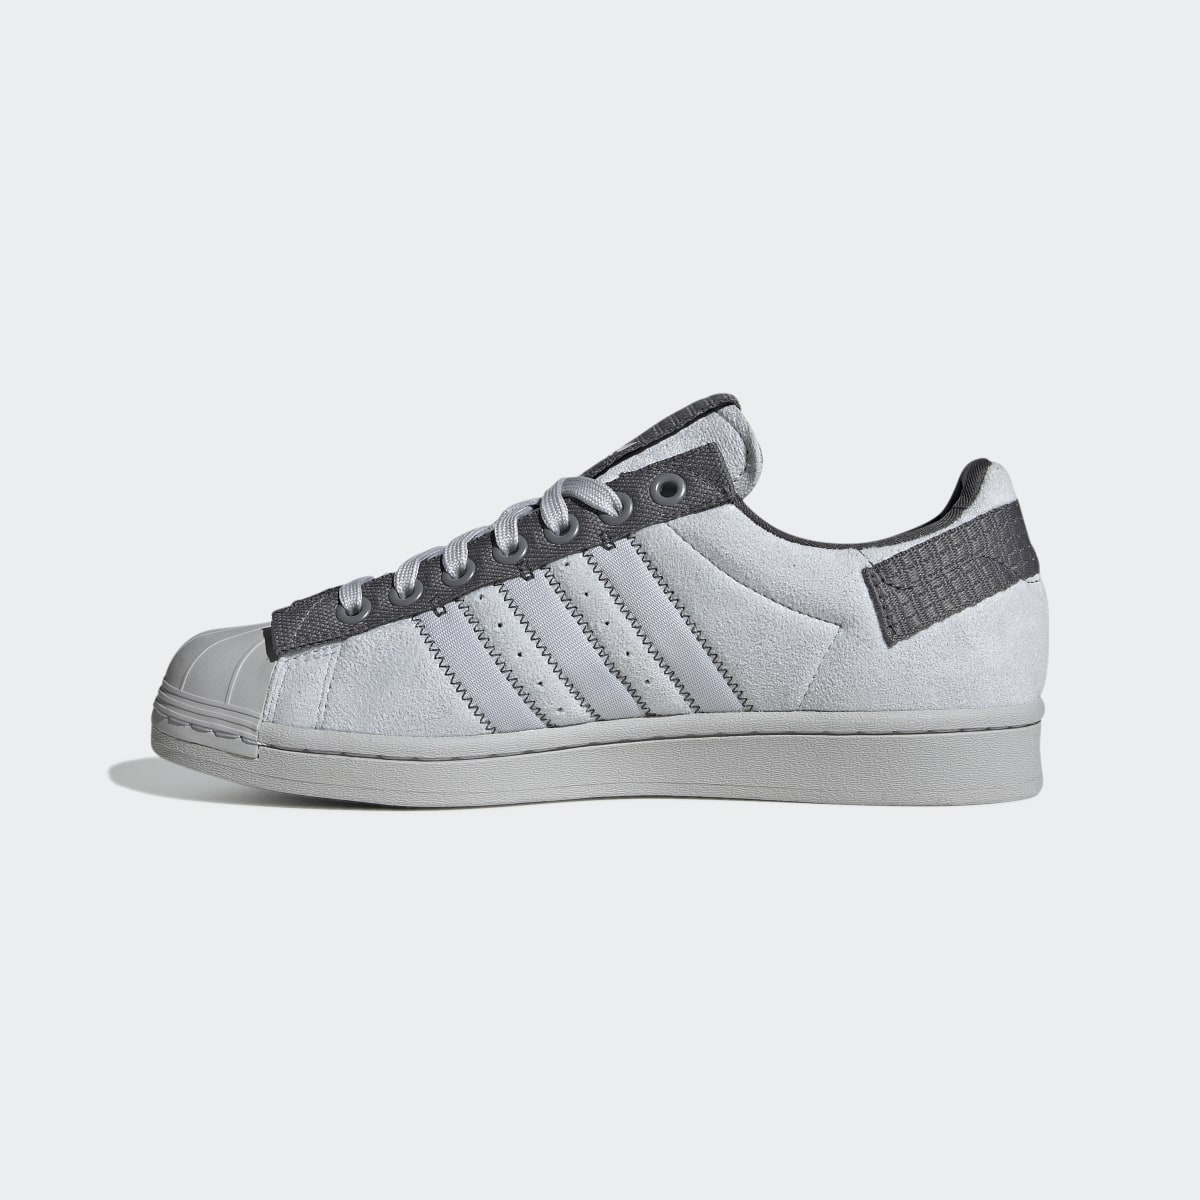 Adidas Superstar Parley Shoes. 10